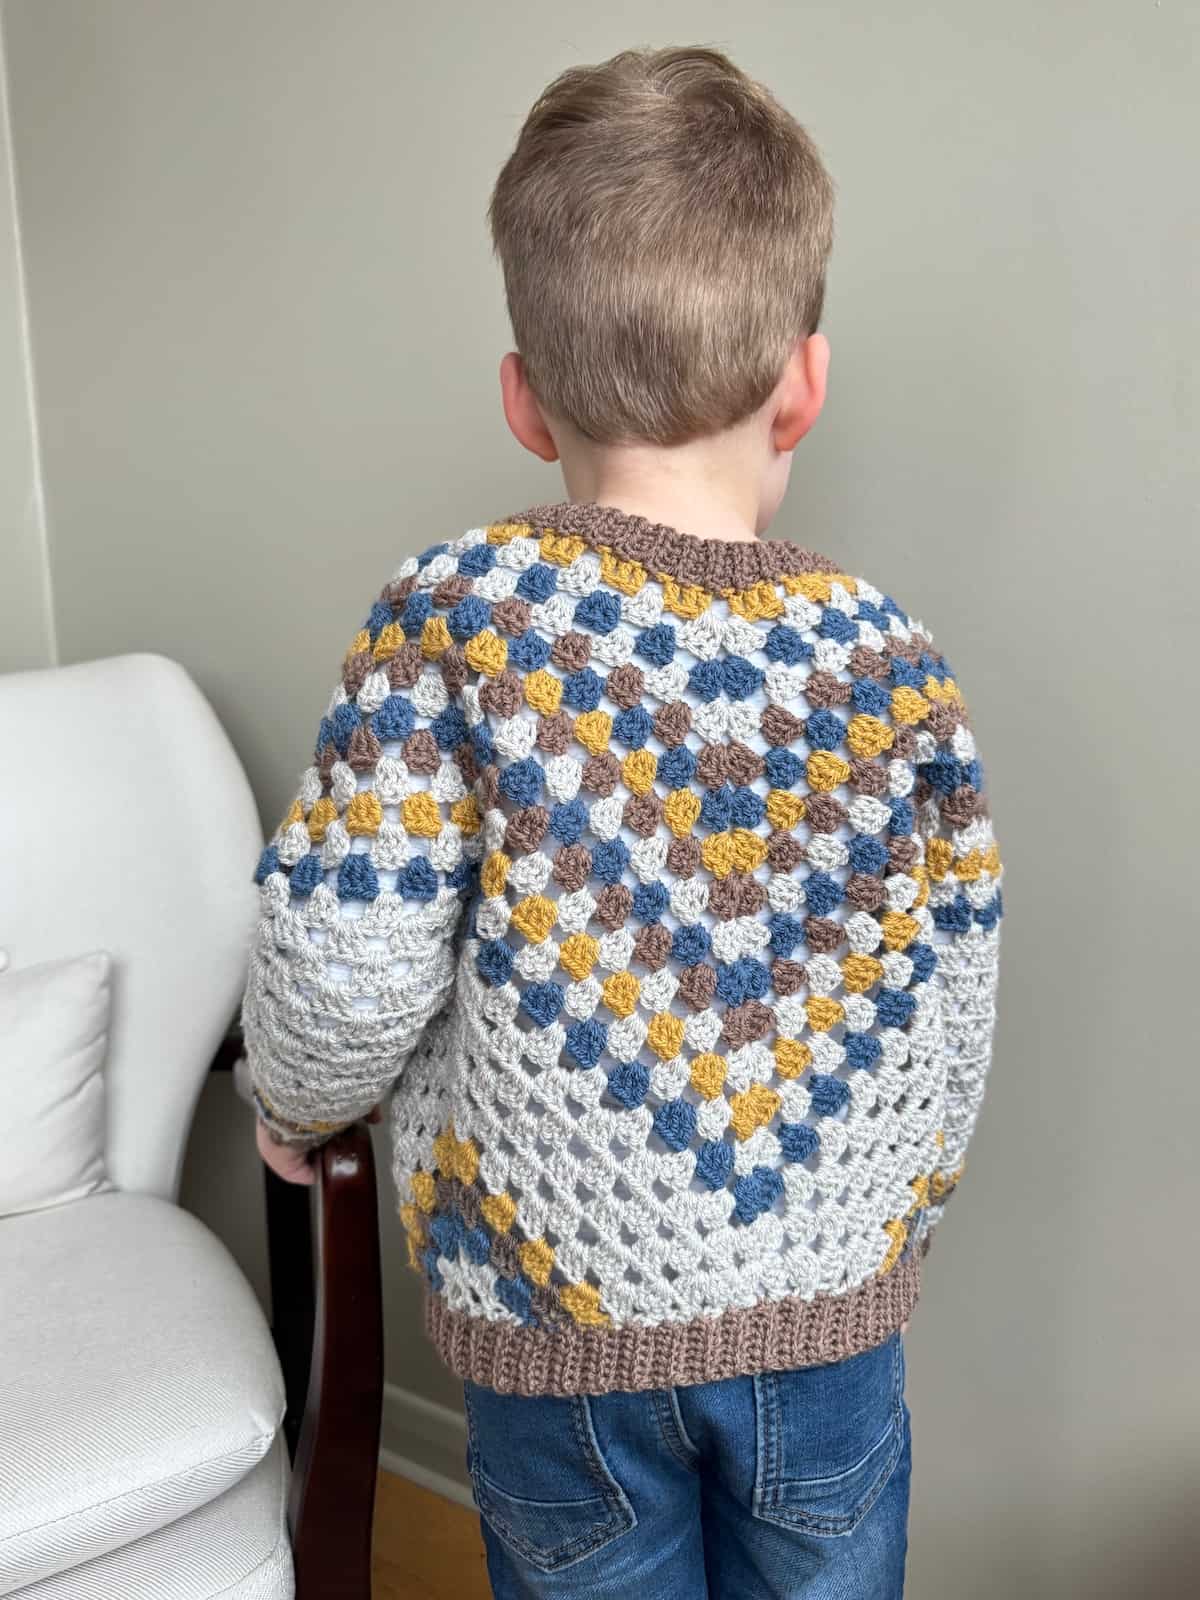 A young boy wearing a colourful crochet cardigan standing in front of a chair.